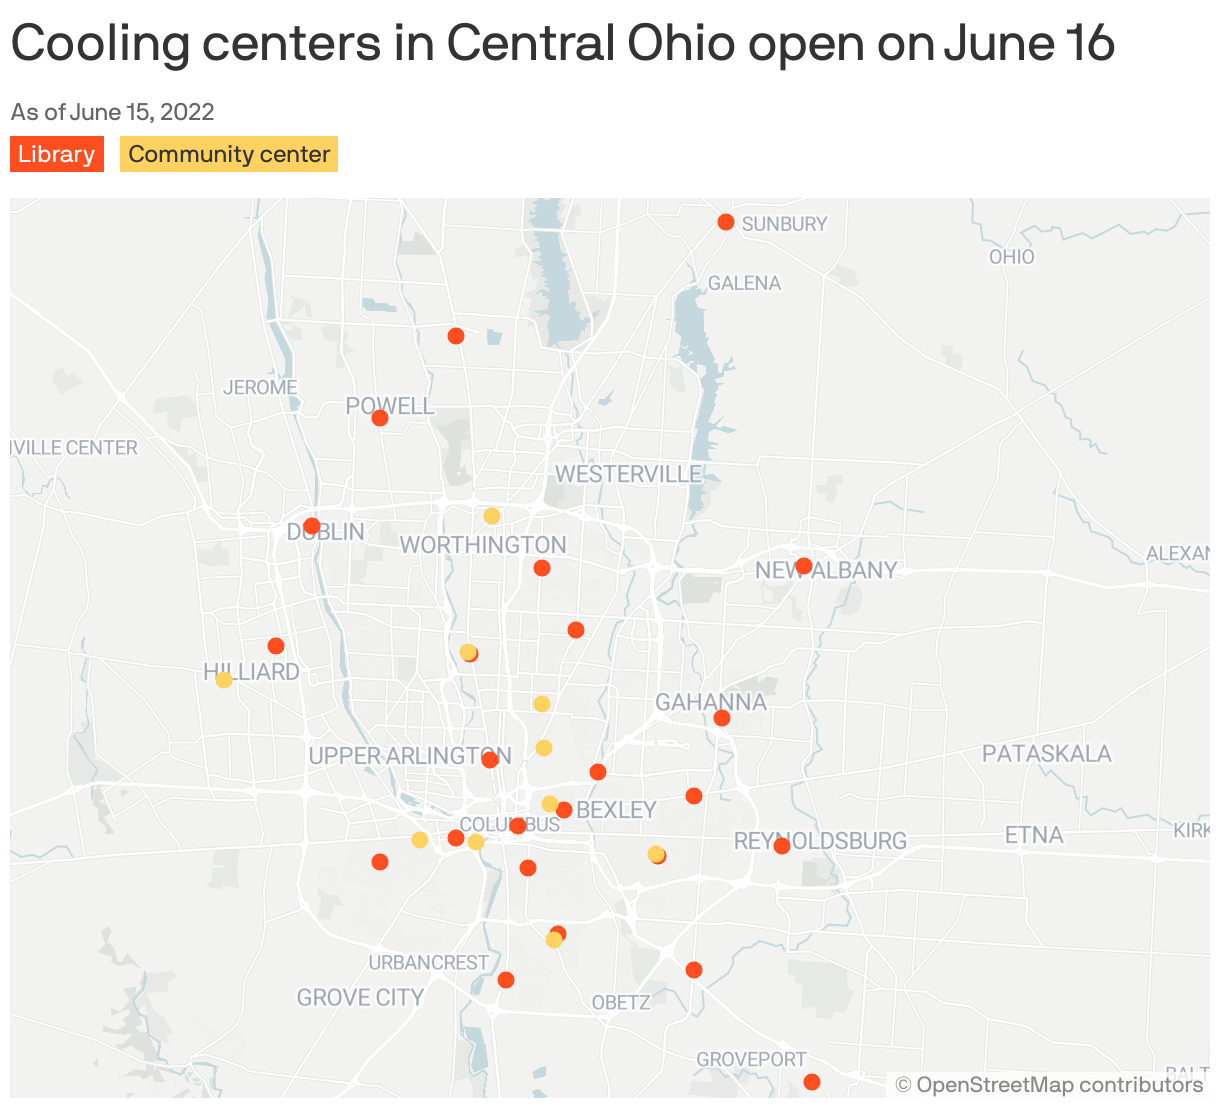 Cooling centers in Central Ohio open on June 16